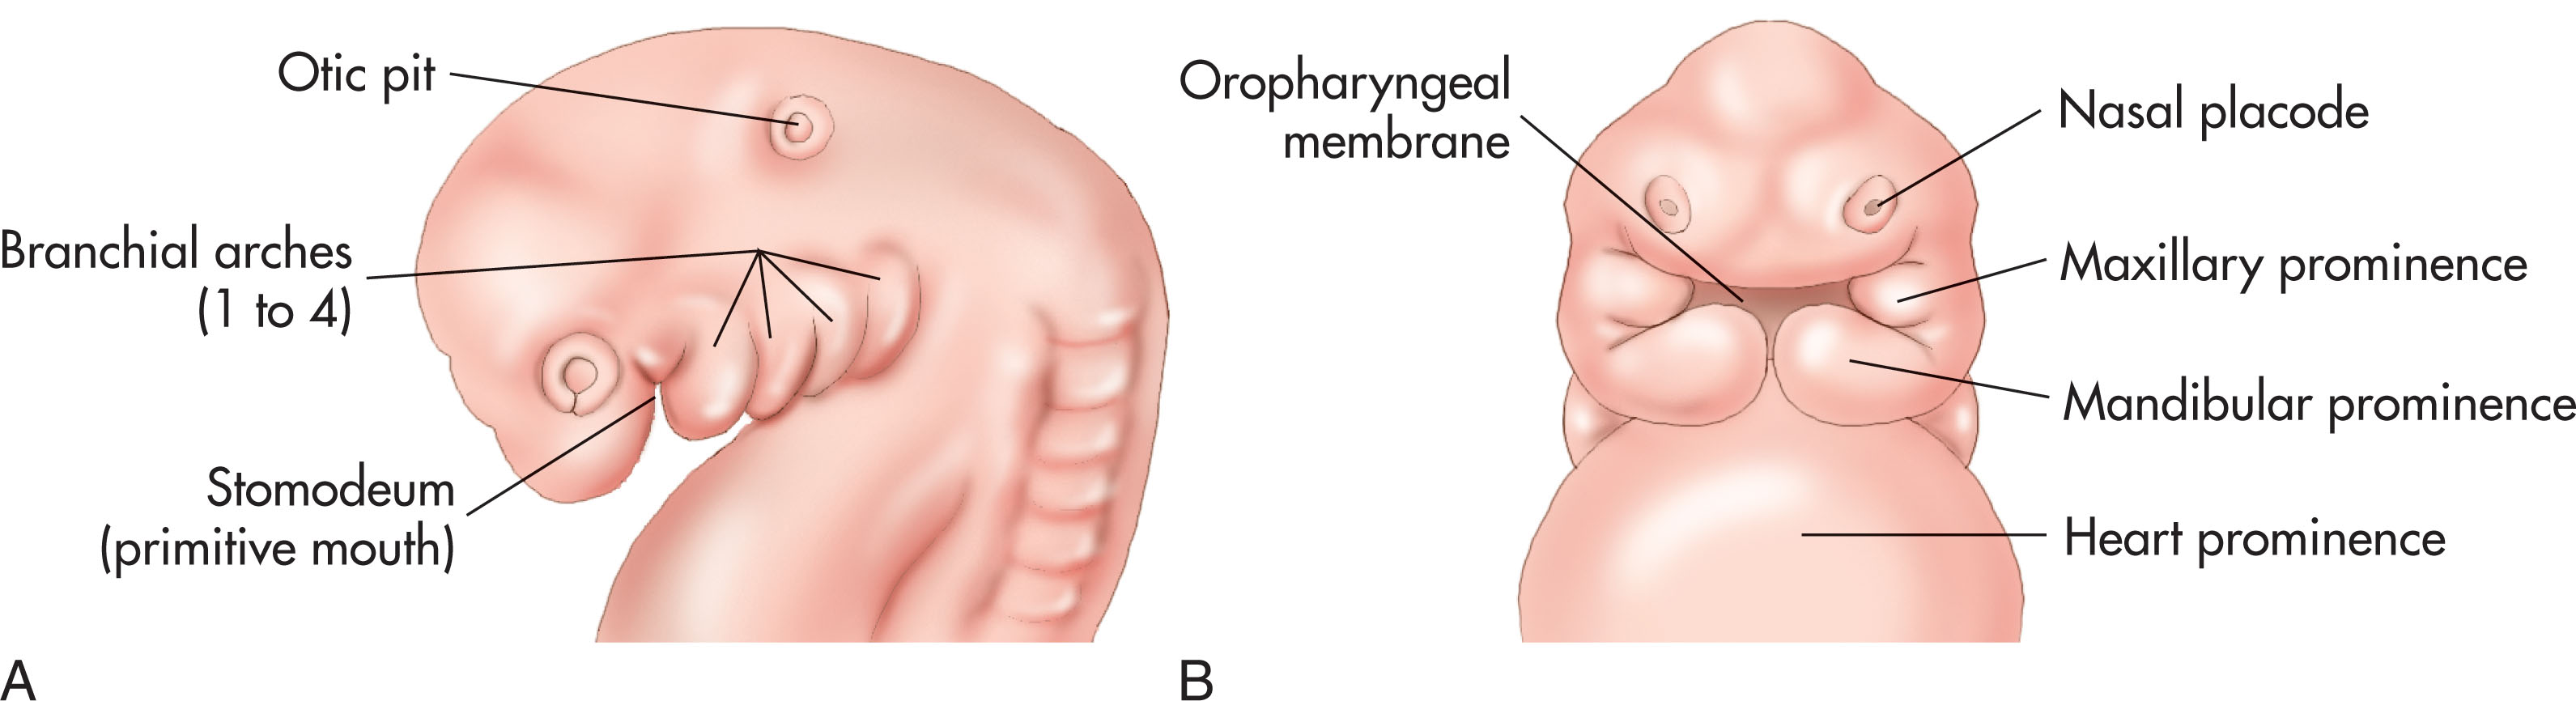 Fig. 59.1, (A) Lateral view of the embryo at 28 days shows four of the six branchial arches, otic pit, and stomodeum. (B) Frontal view of the embryo at 24 days demonstrates the nasal placode, maxillary prominence, and mandibular prominence.